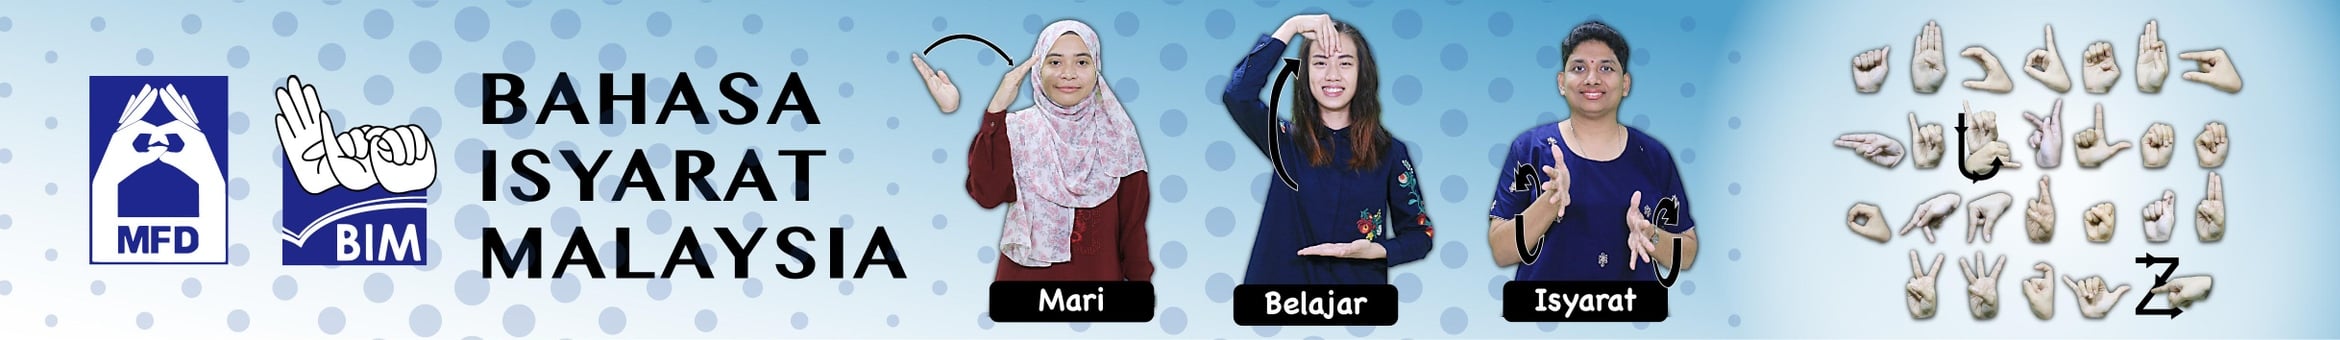 course__courses_malaysiansignlanguage__course-banner-image-1560755211.43